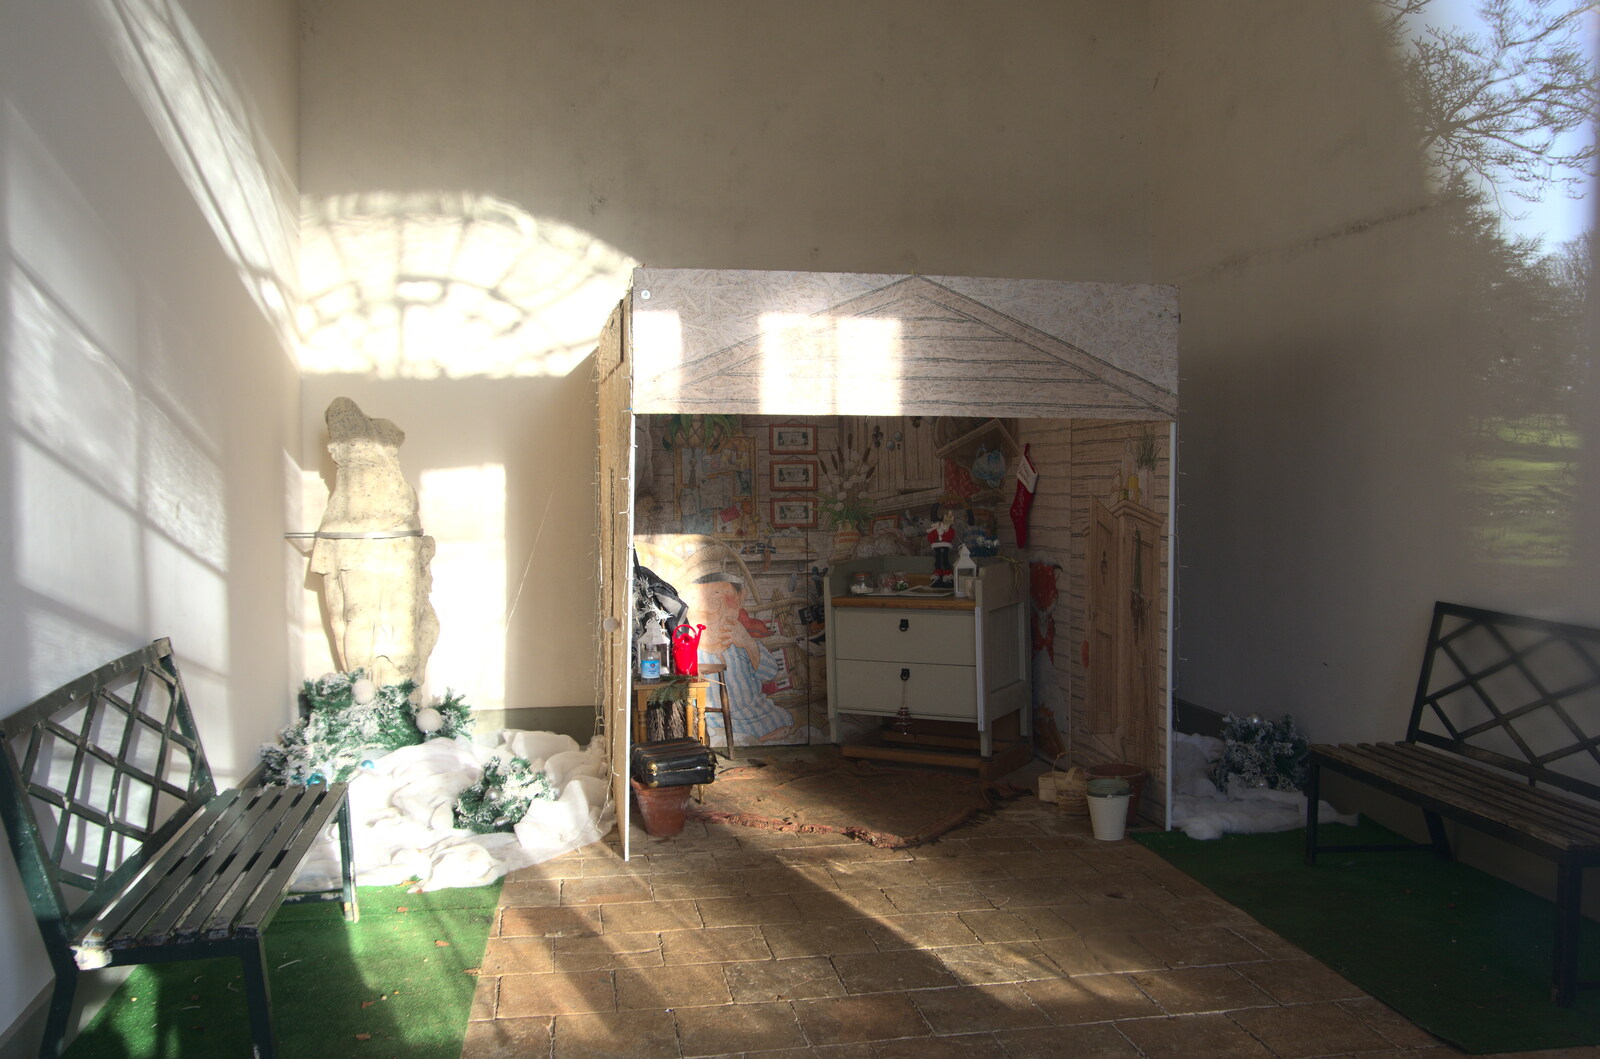 There's a Santa's grotto left over from Christmas from A Visit to Blickling Hall, Aylsham, Norfolk - 9th January 2022